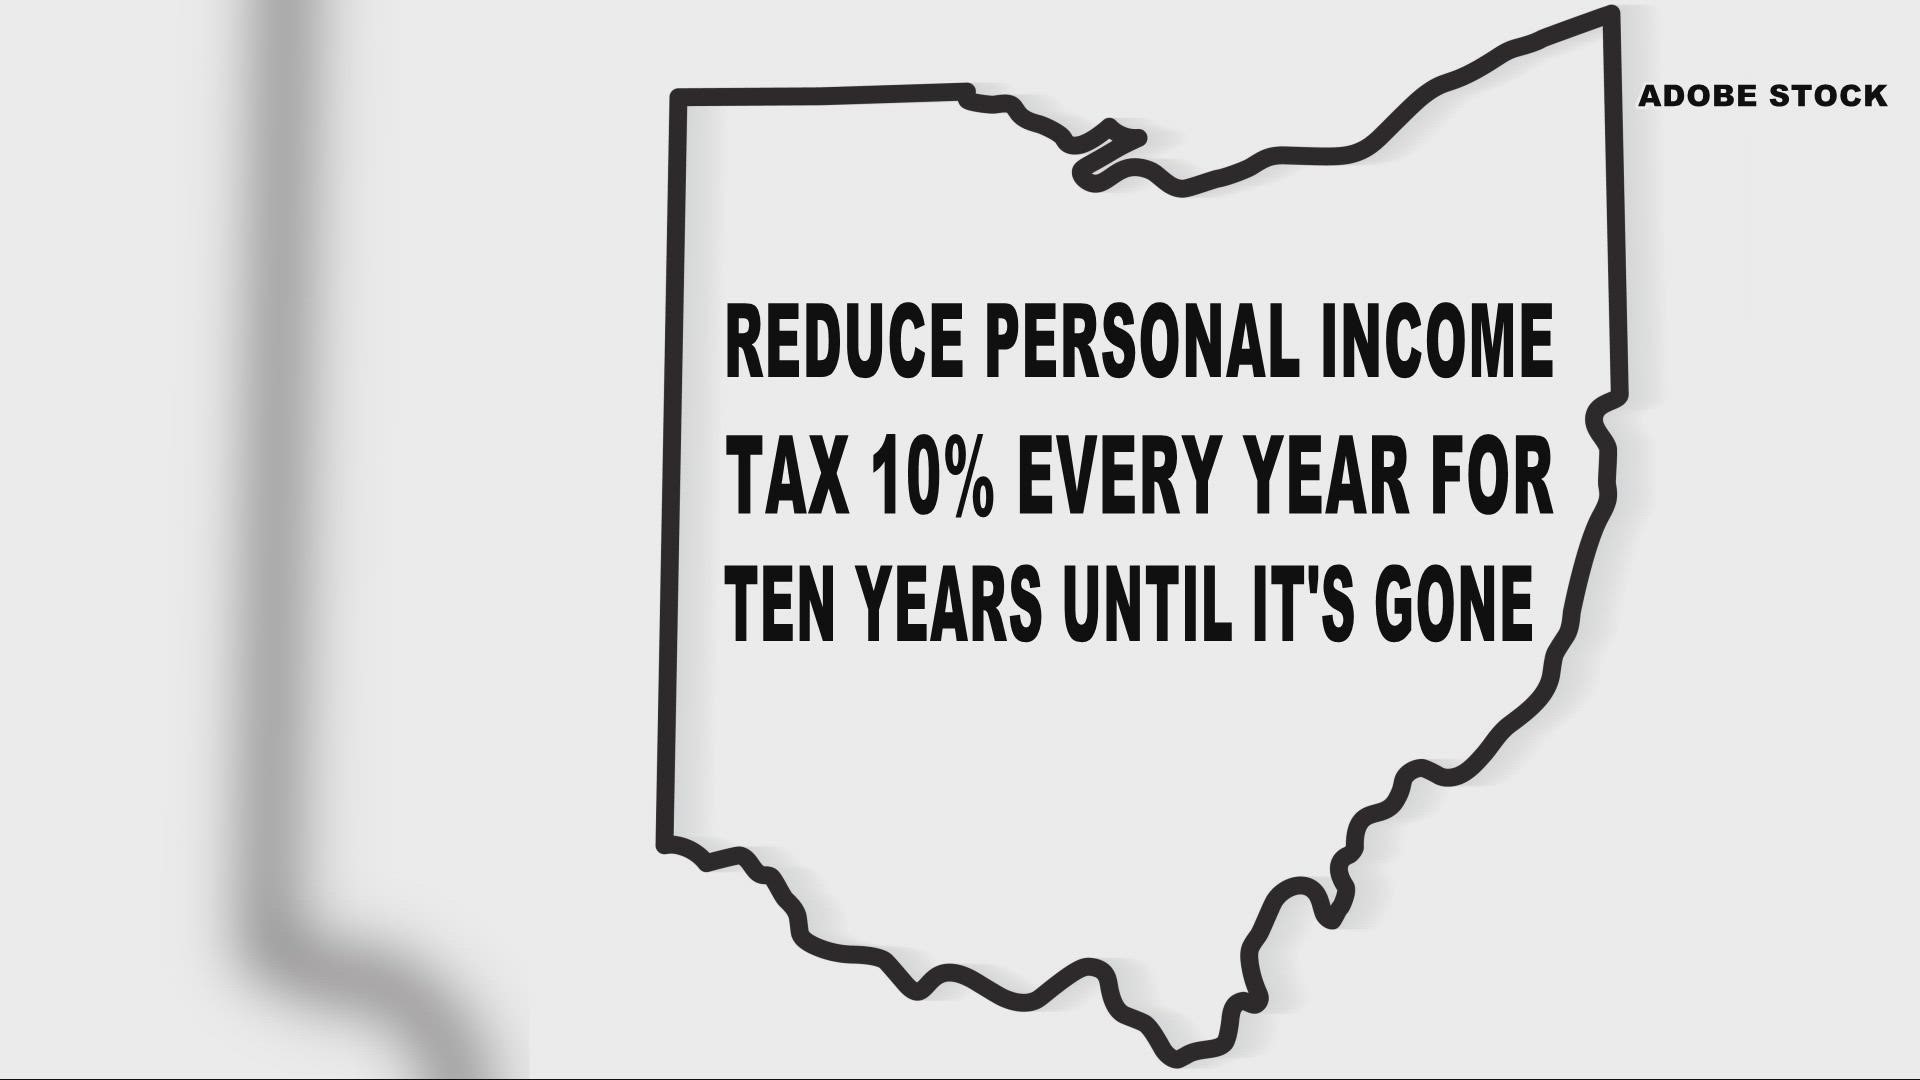 A bill was introduced on Tuesday that lays out a plan that would completely abolish our state income tax here in Ohio in ten years.